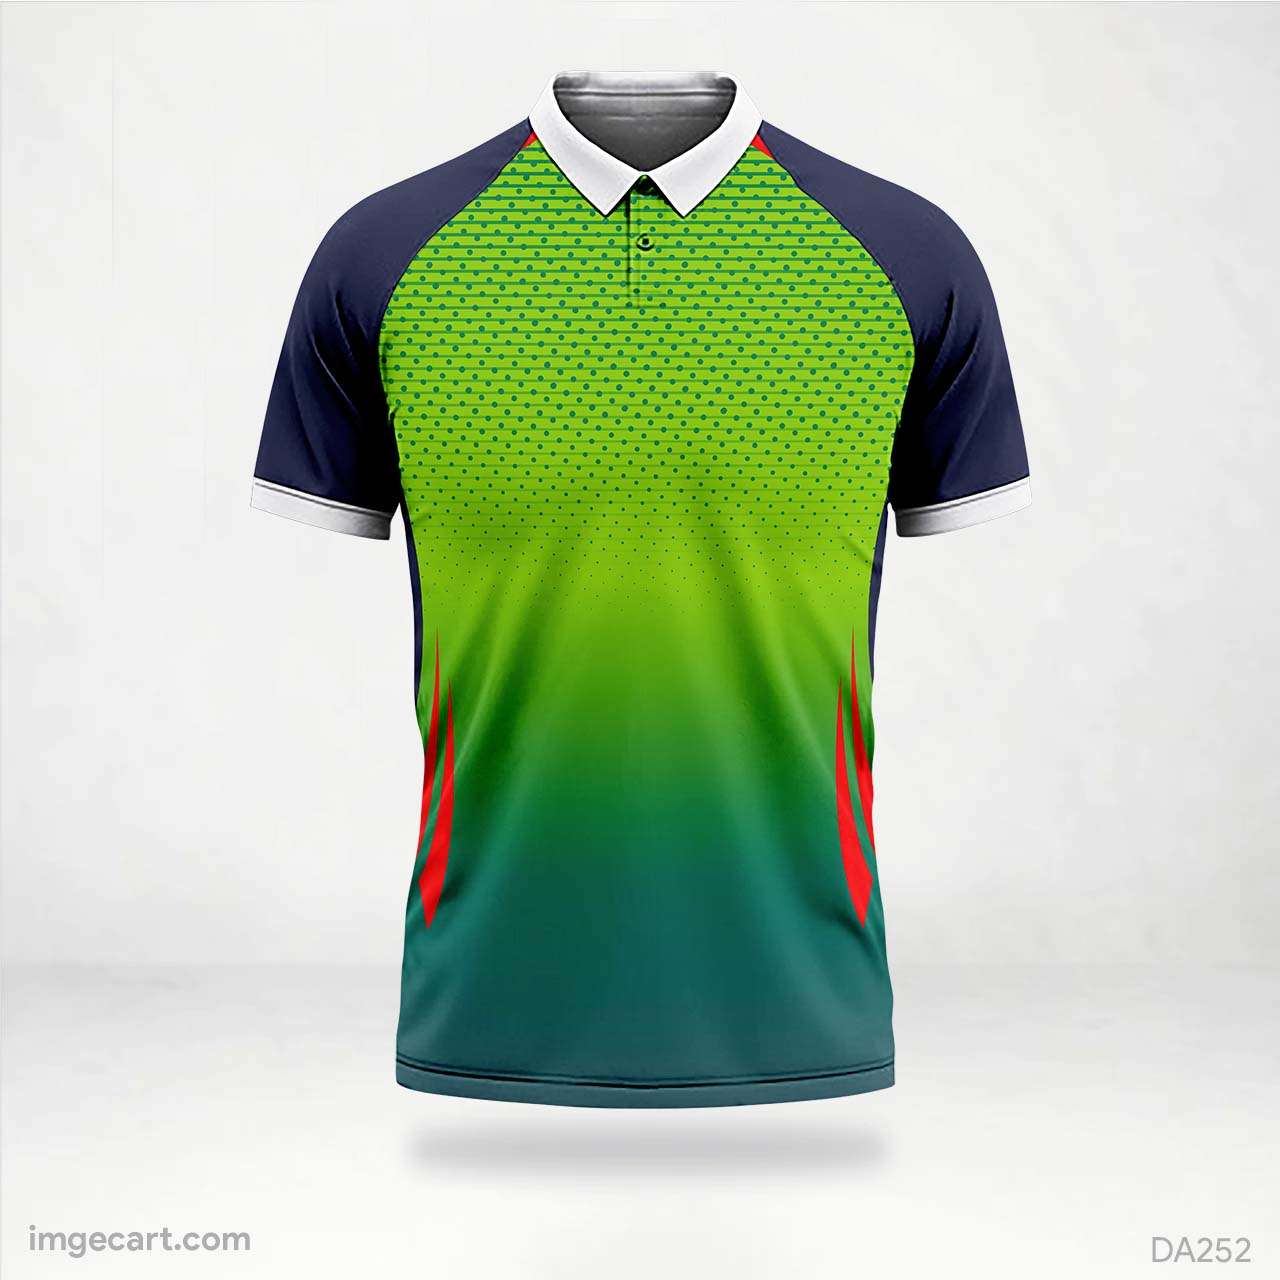 Cricket Jersey Design Blue with red and green - imgecart